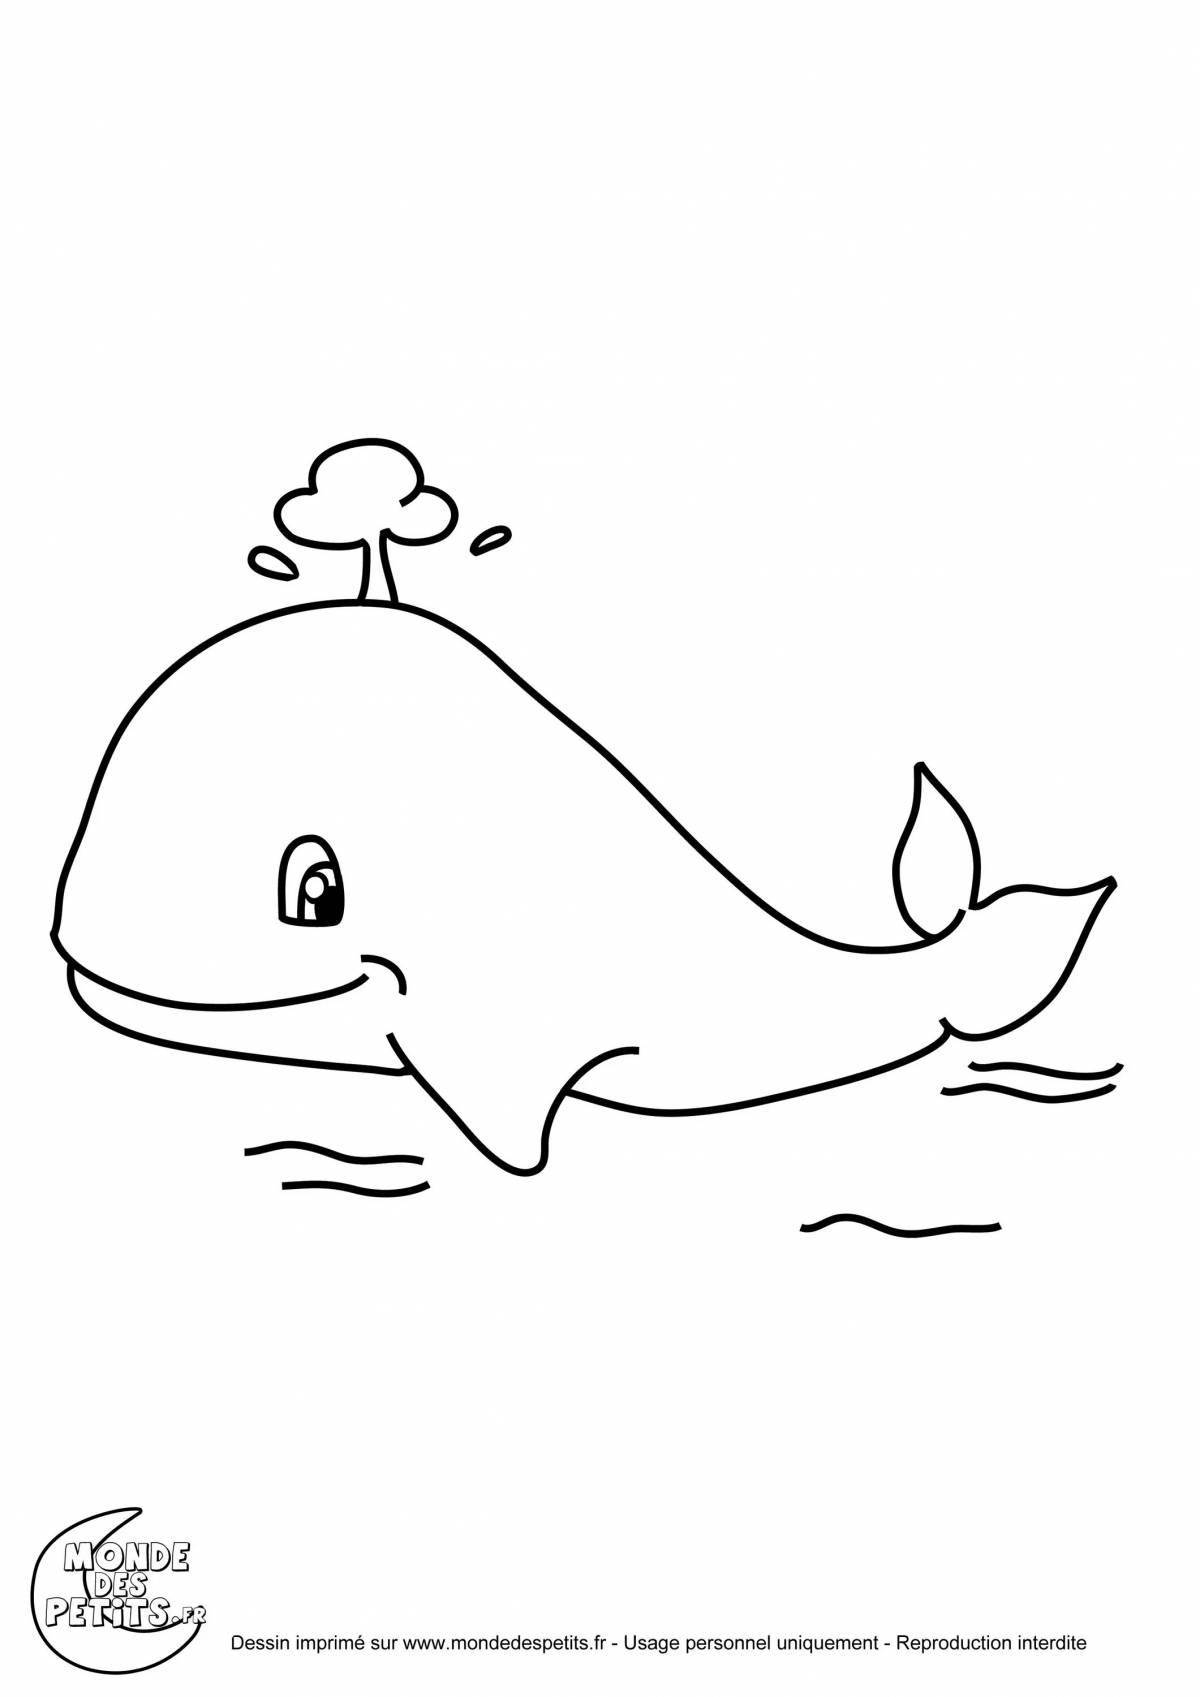 Serene three whales in music coloring book